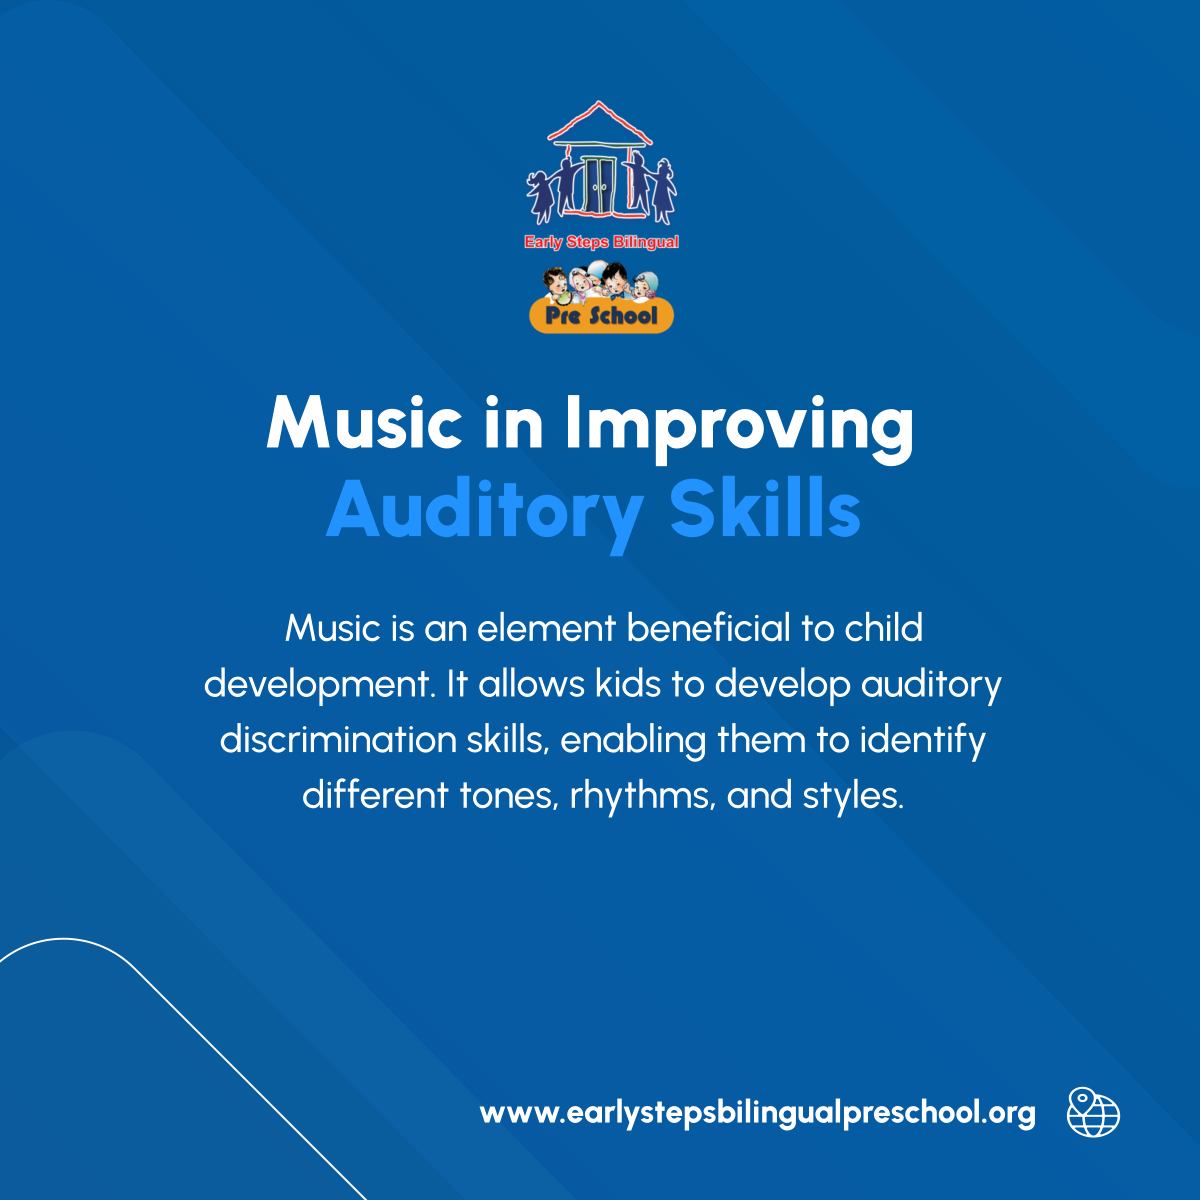 Allow music to fill every corner of your home for your children to listen to. Exposing them to music sparks their love of music. Hence, they recognize different sounds easily from music or other forms of sounds. 

#ArlingtonVA #Music #AuditorySkills